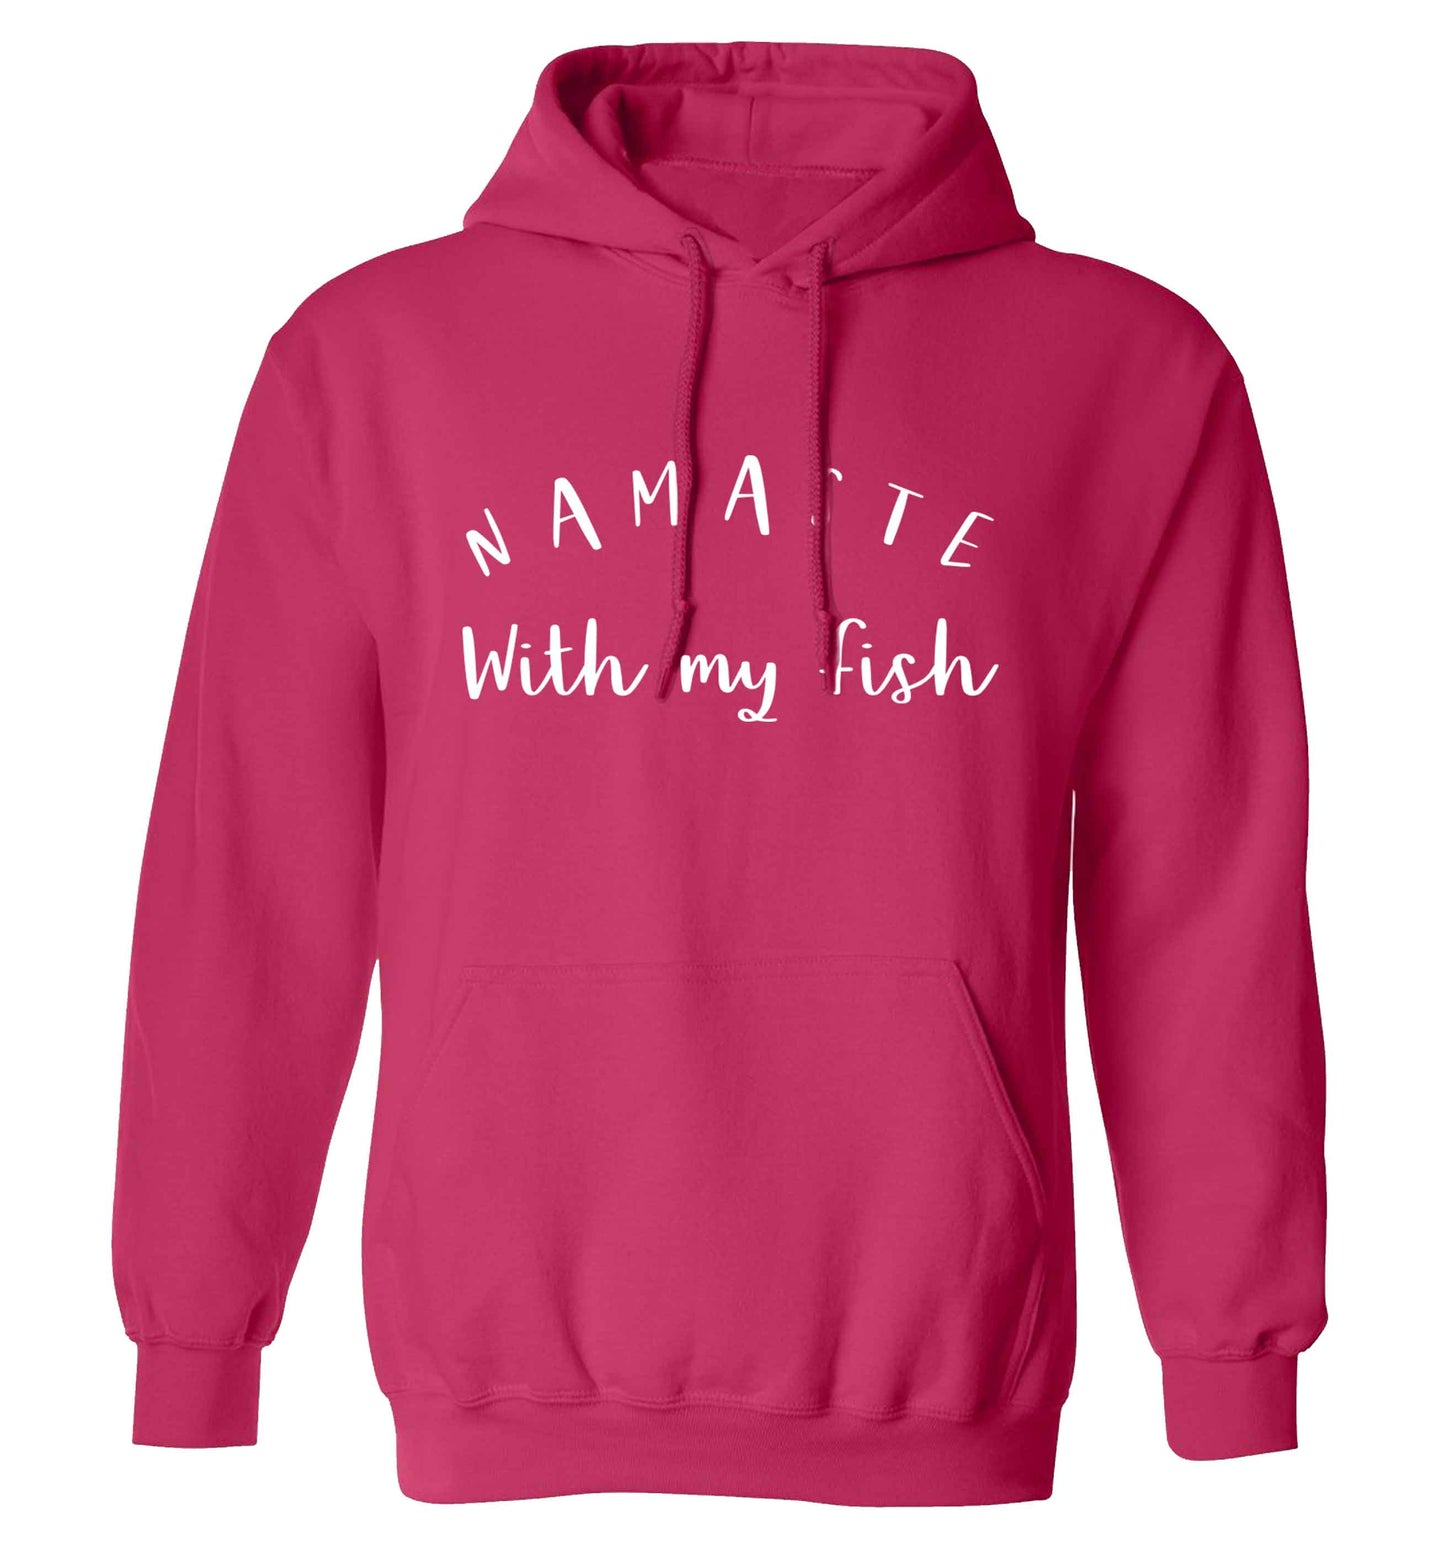 Namaste with my fish adults unisex pink hoodie 2XL